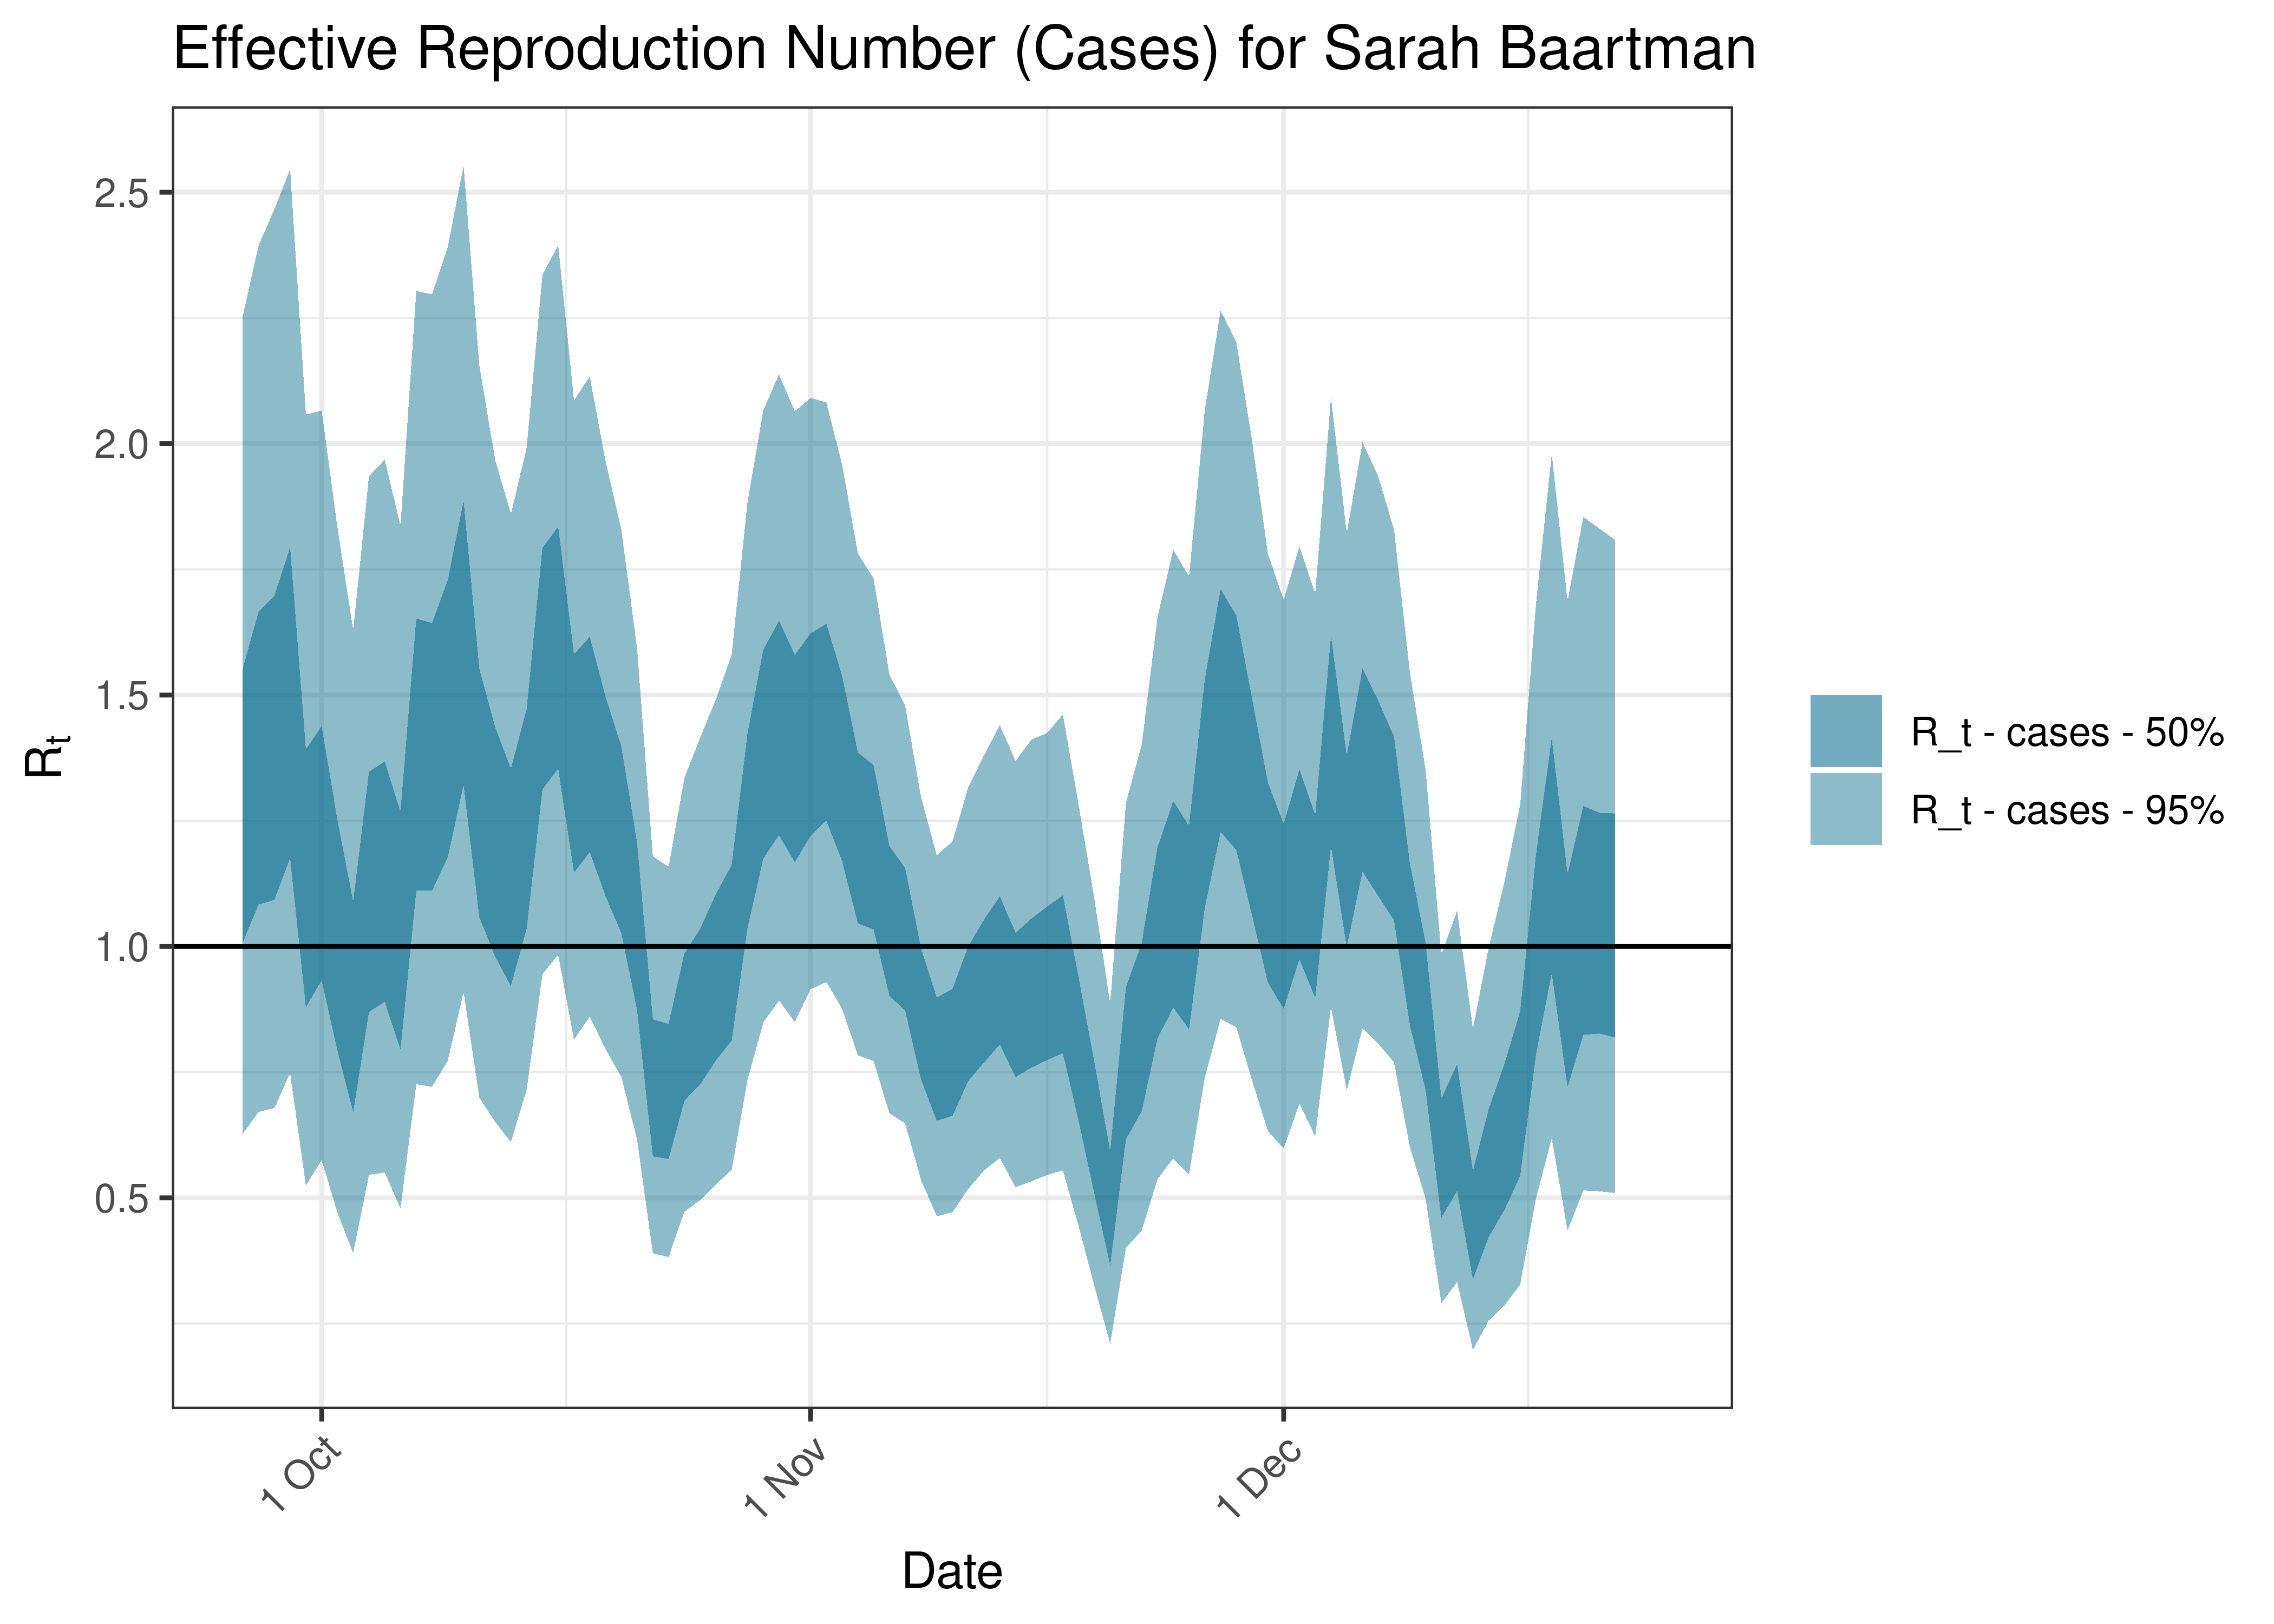 Estimated Effective Reproduction Number Based on Cases for Sarah Baartman over last 90 days